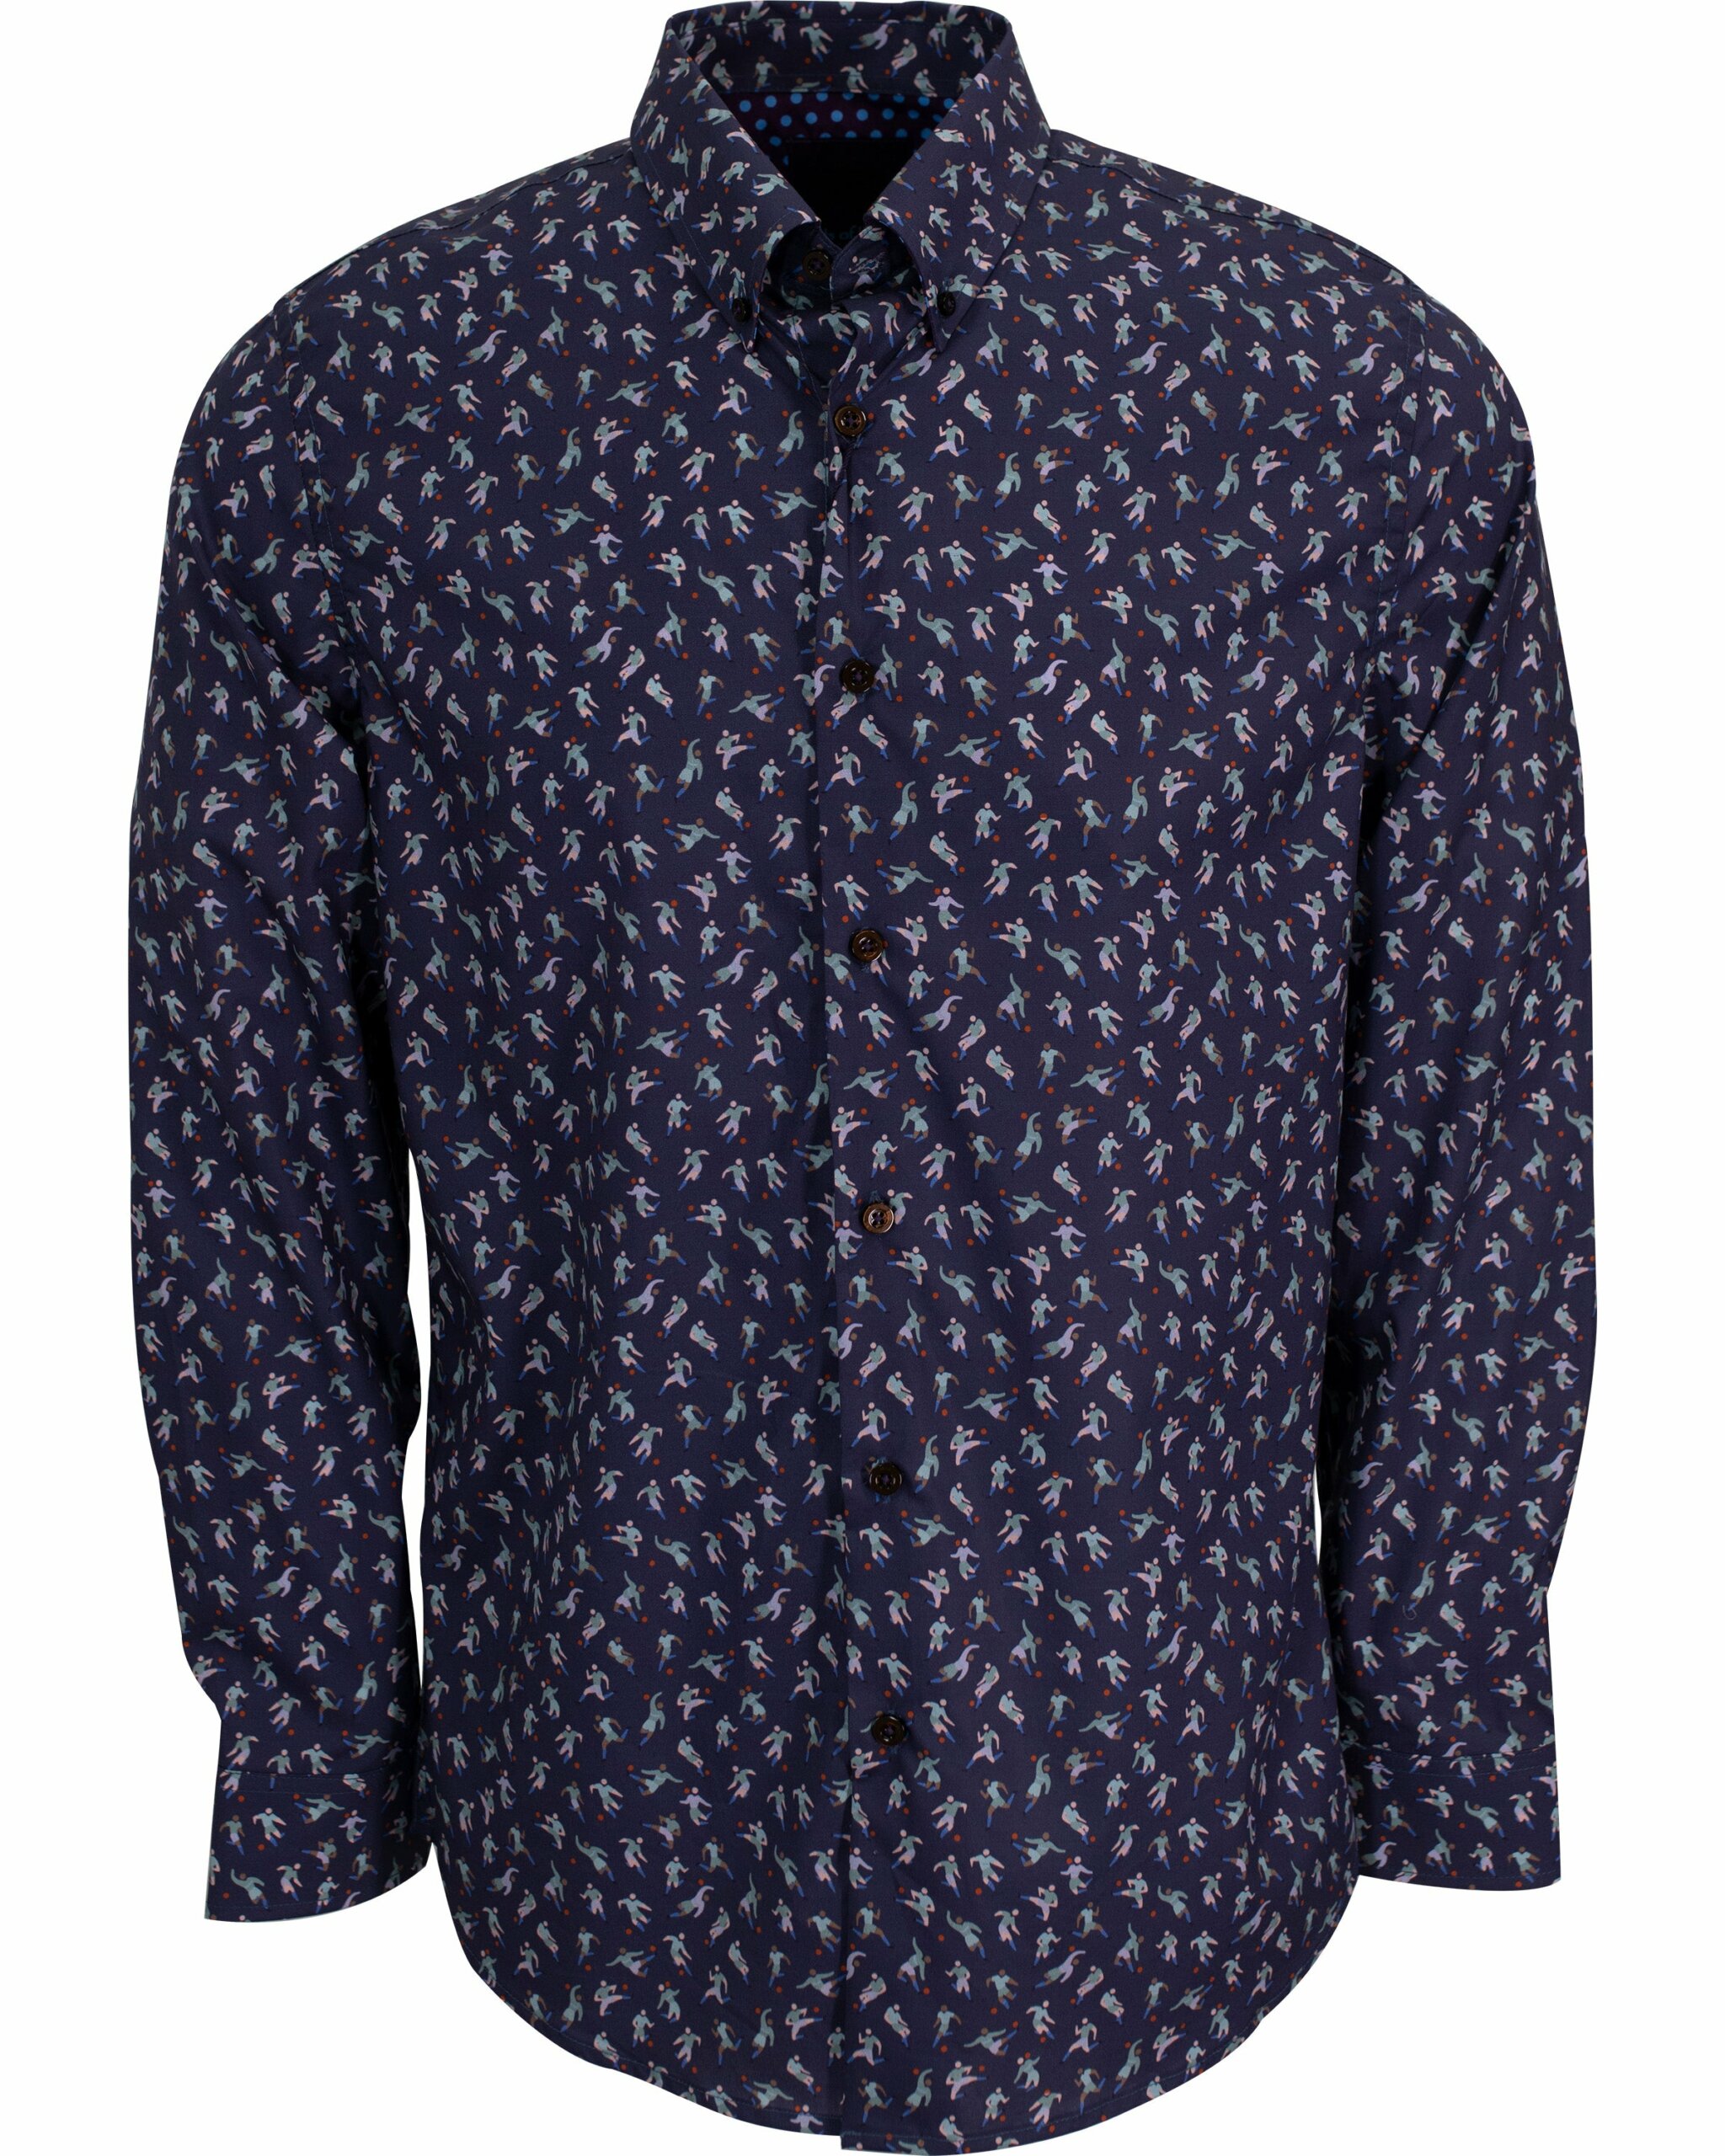 Men's Blue / White / Red Mitchell Soccer Players Shirt In Skipper Small Lords of Harlech